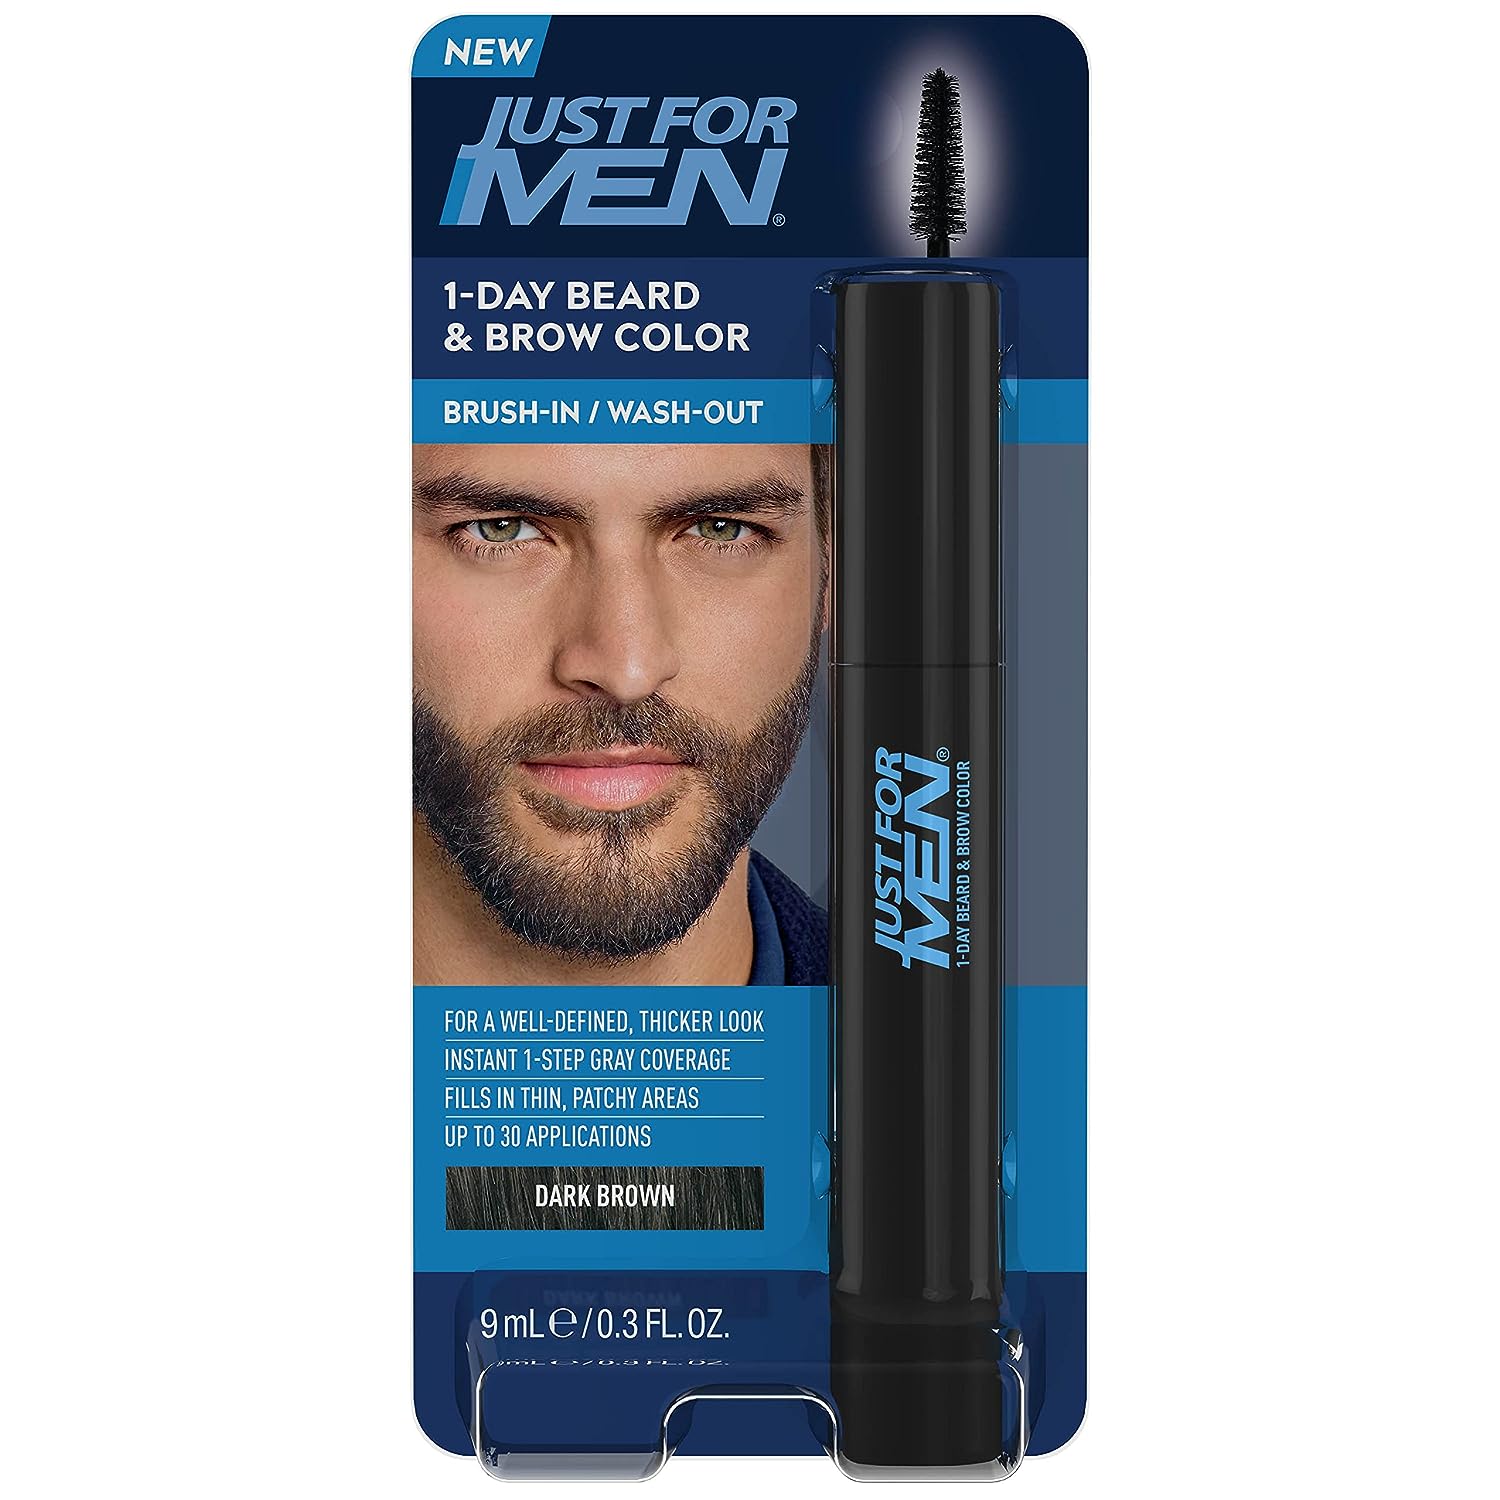 Just for Men 1-Day Beard & Brow Color, Temporary Color for Beard and Eyebrows, For a Fuller, Well-Defined Look, Up to 30 Applications, Dark Brown